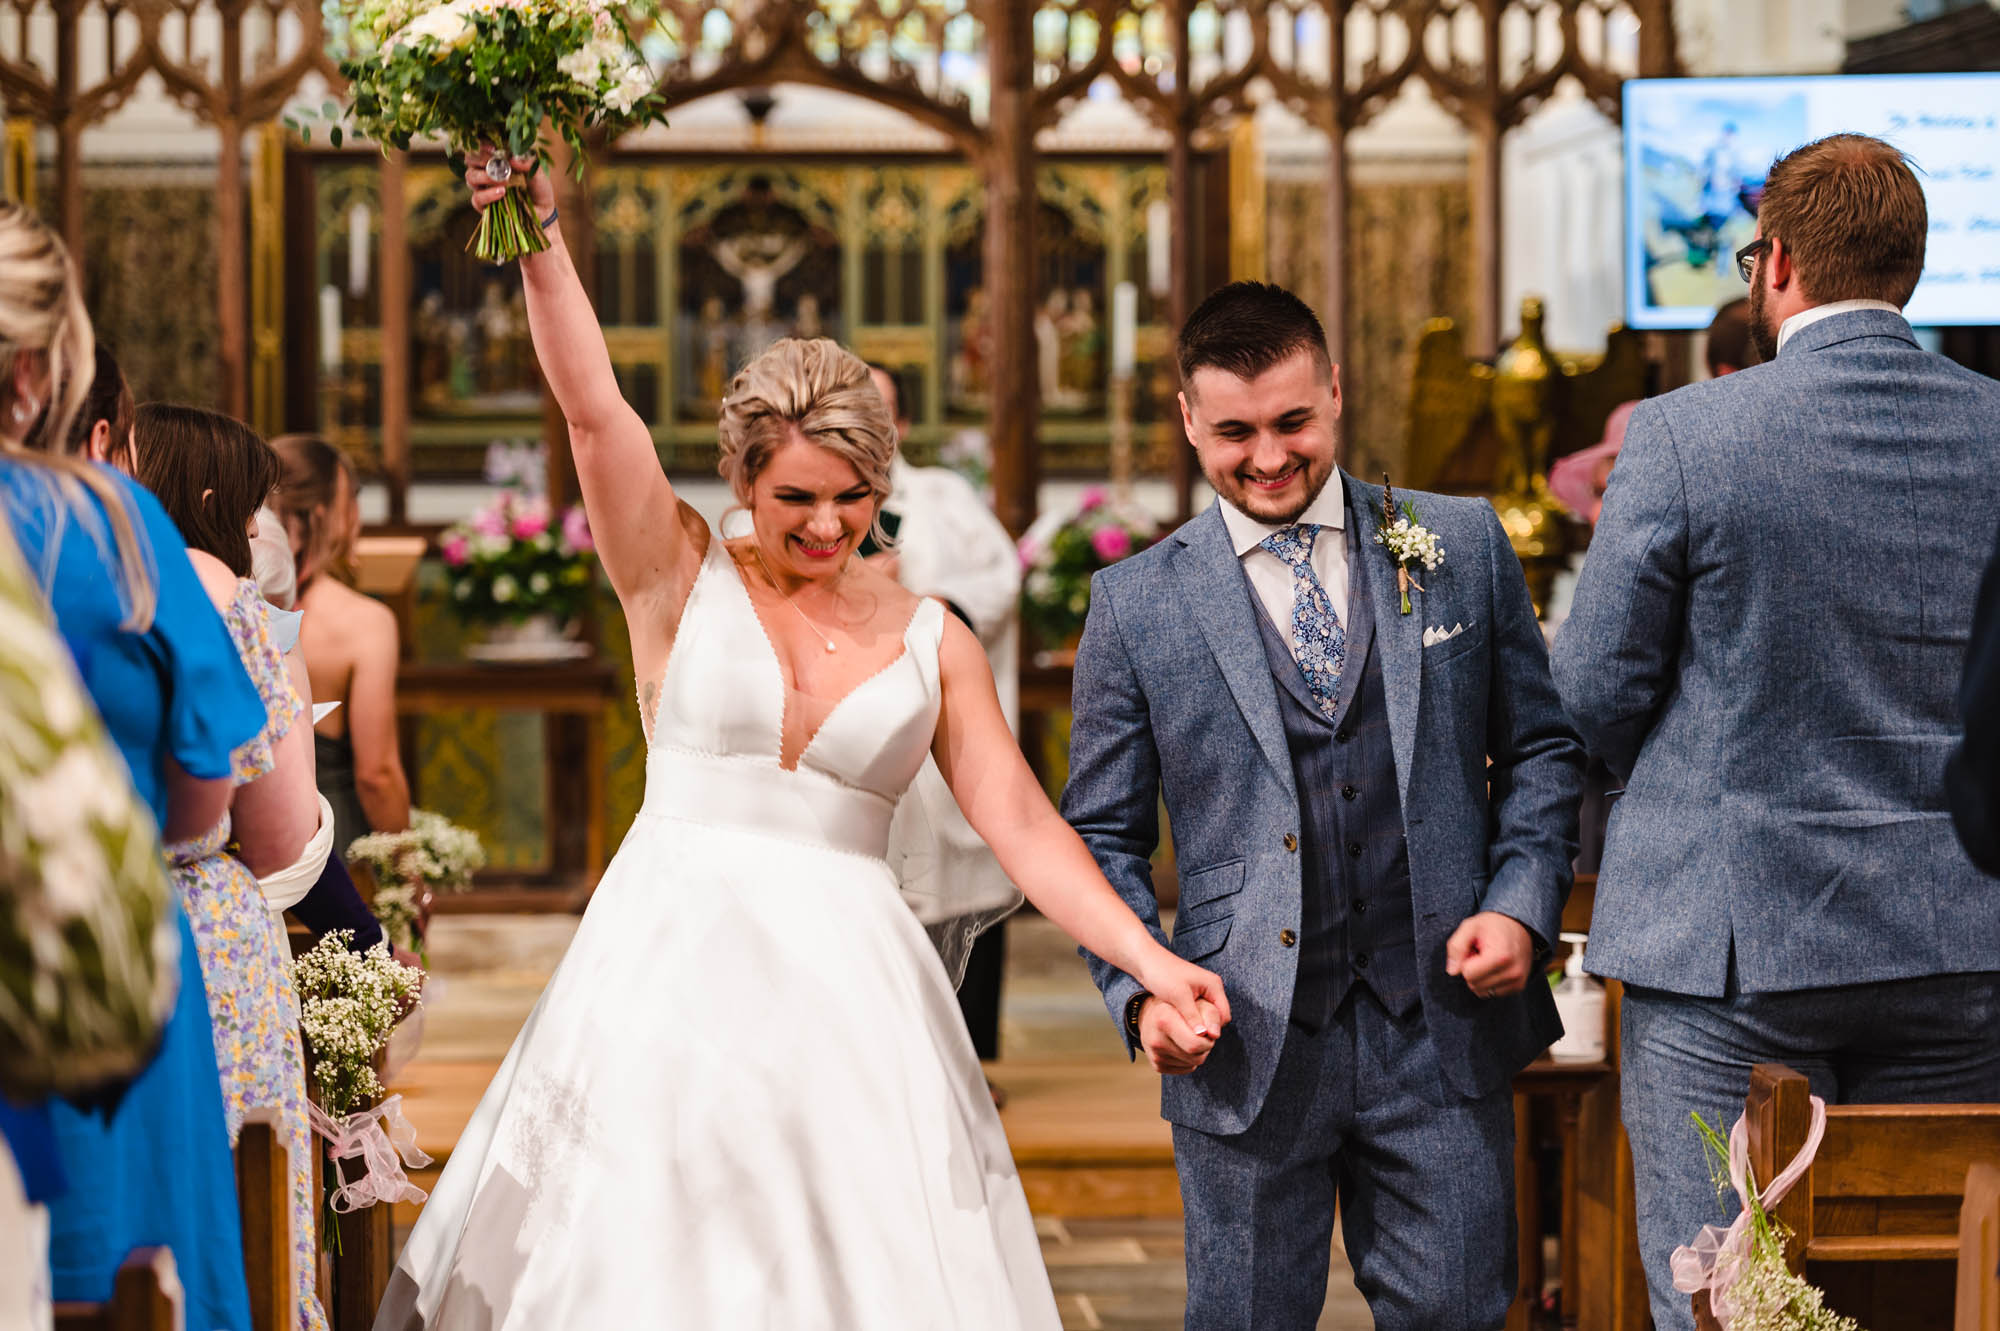 A bride raises her bouquet in the air in celebration as she walks back down the aisle with her husband